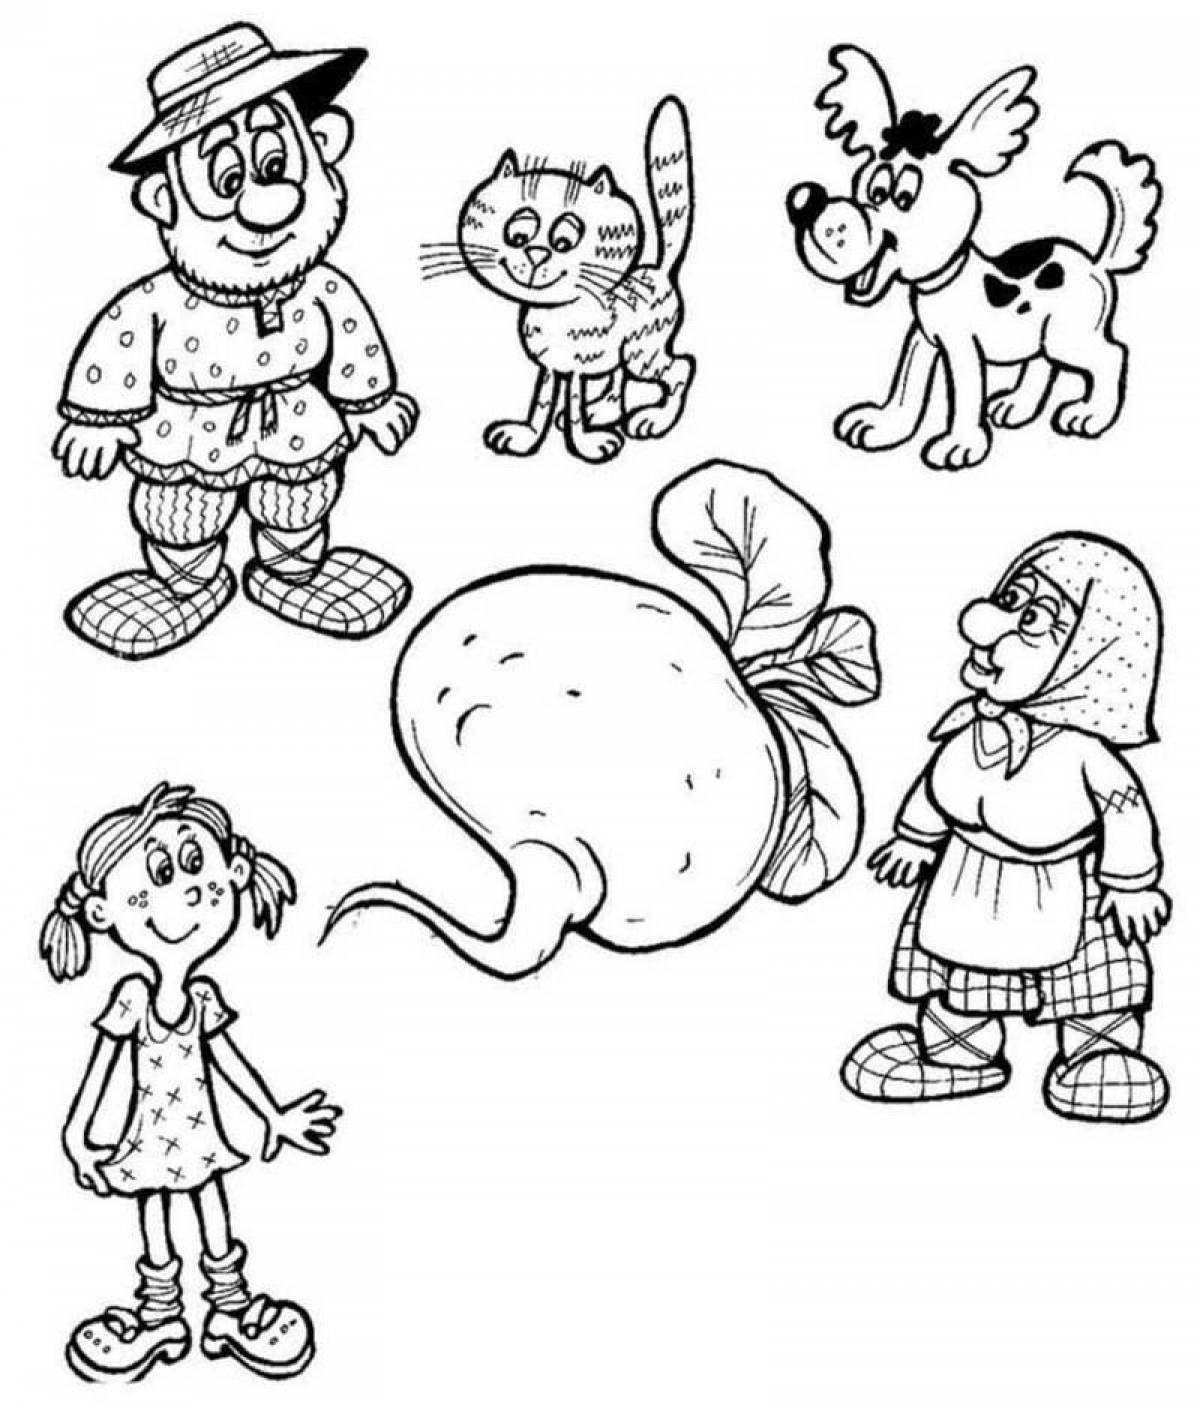 Outstanding turnip coloring page for toddlers 2-3